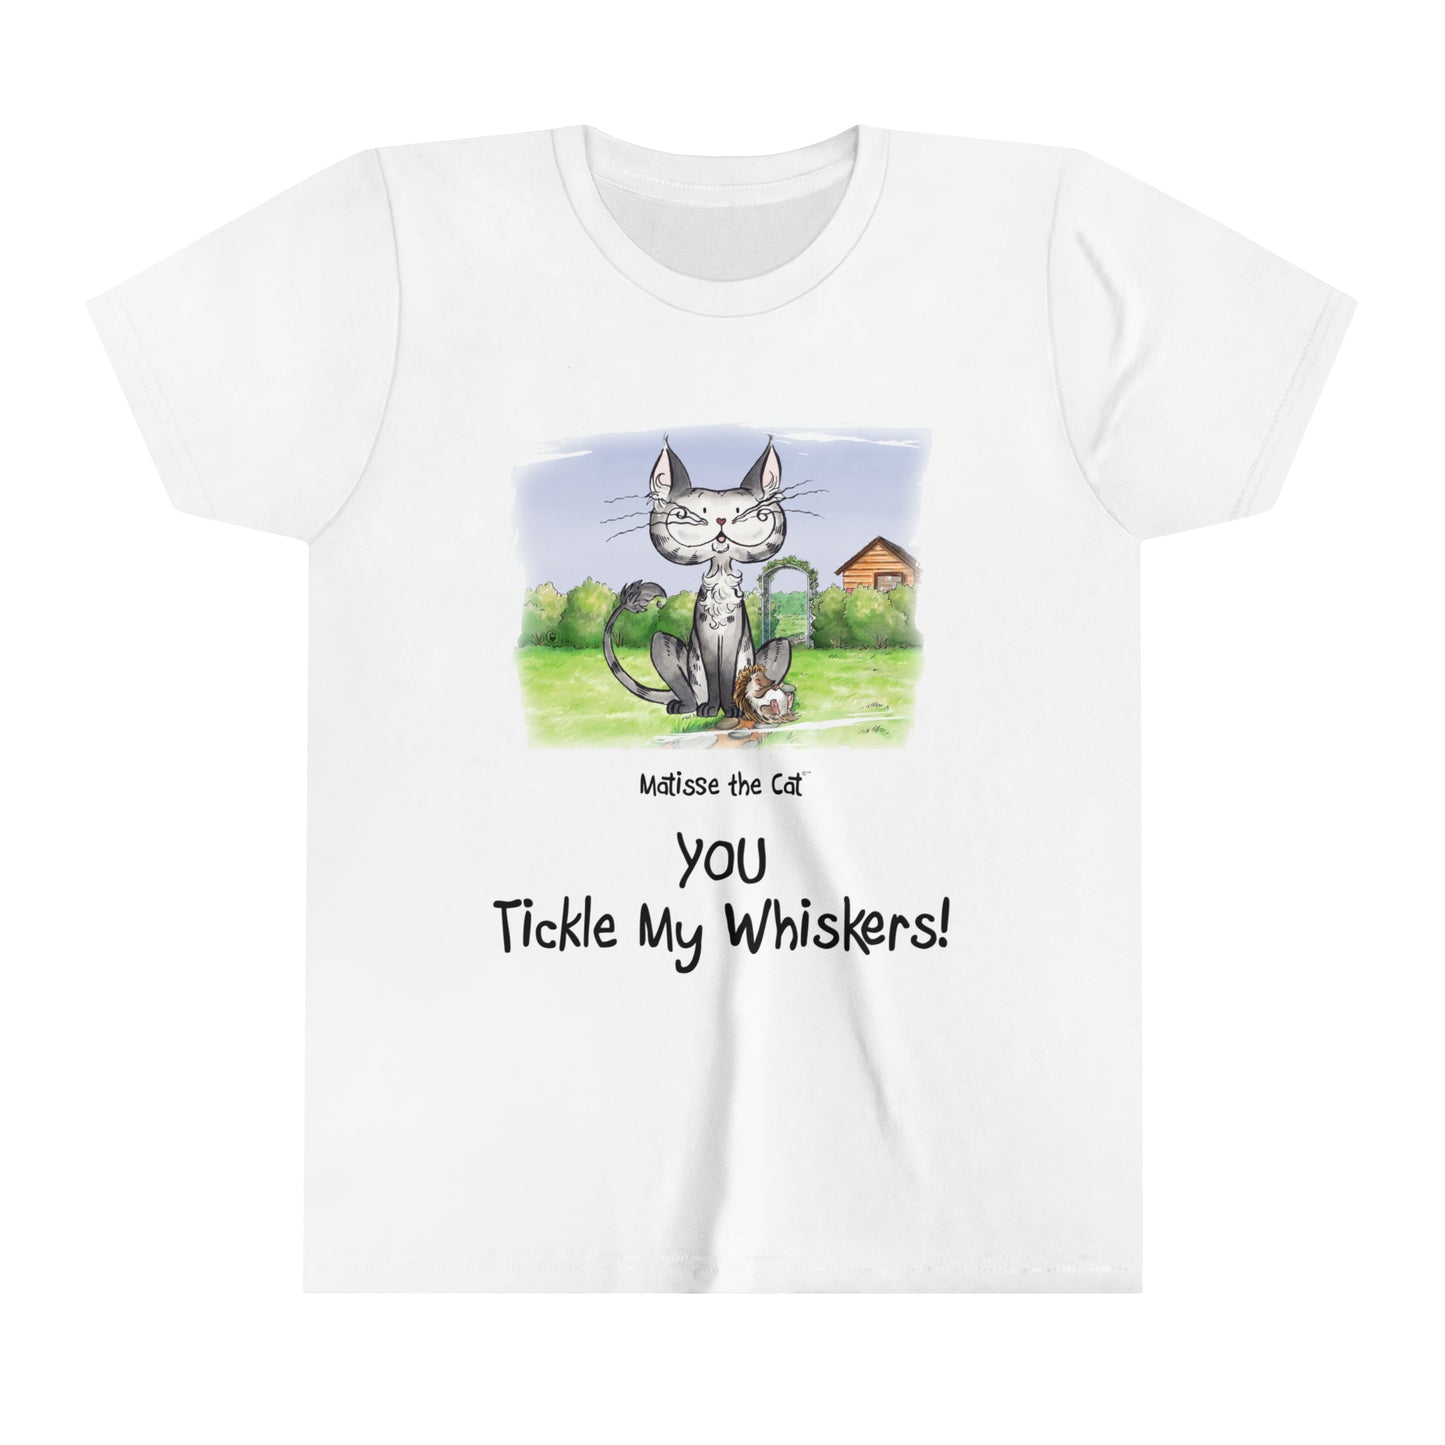 A white official, Matisse the Cat children’s t-shirt with the slogan ‘YOU Tickle My Whiskers ‘ showcases Matisse sitting in his garden smiling with a sleeping hedgehog curled up beside him resting on his leg.